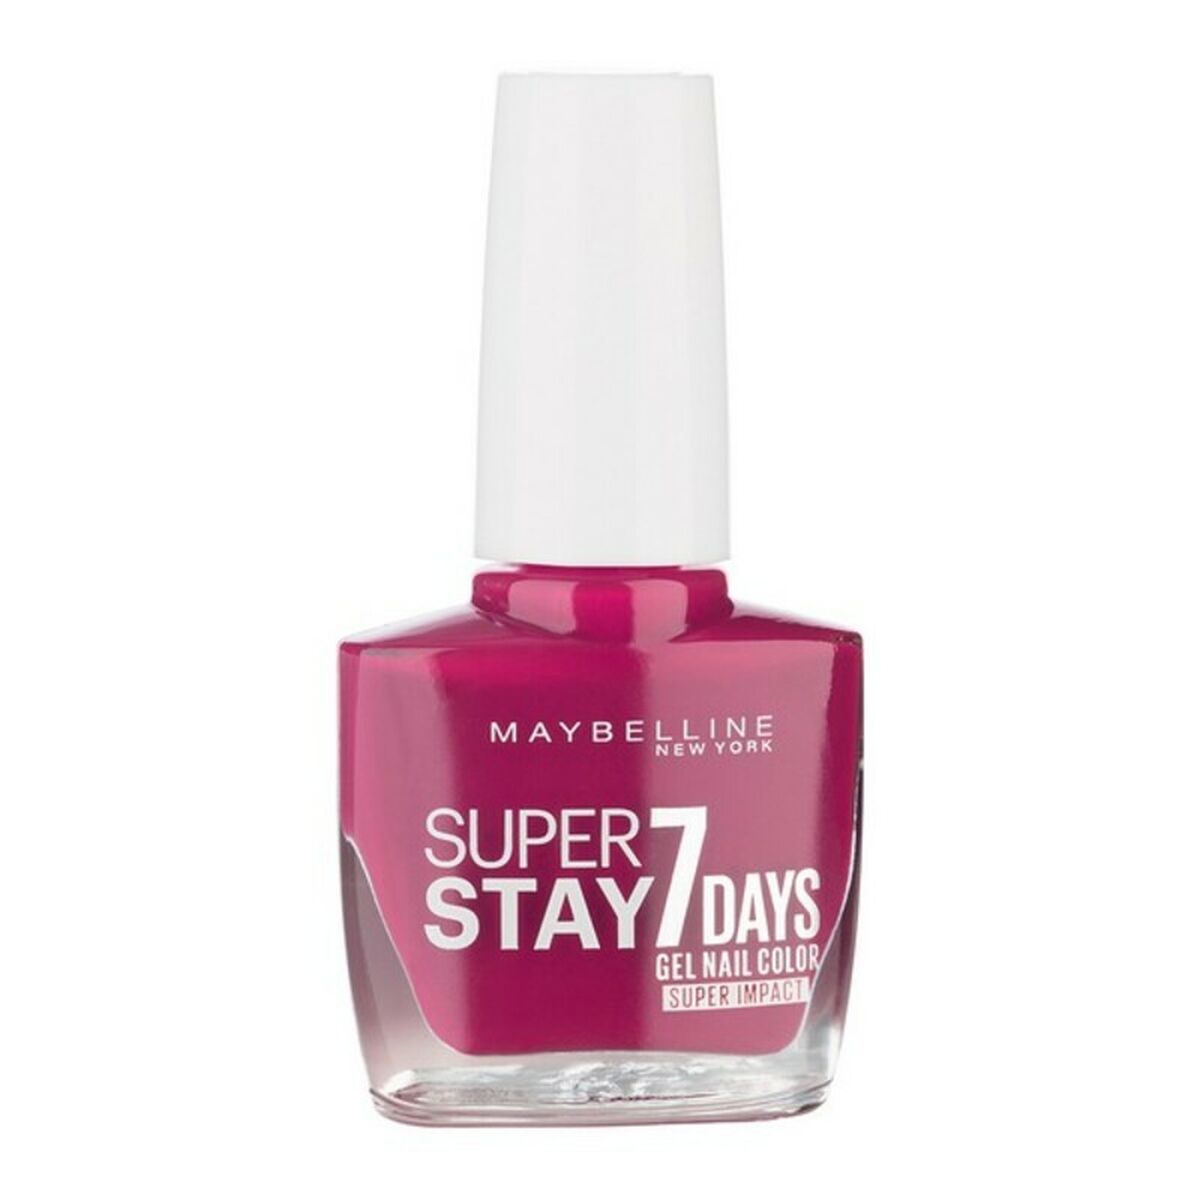 nail polish Superstay 7 Days Maybelline (10 ml) - Calm Beauty IE